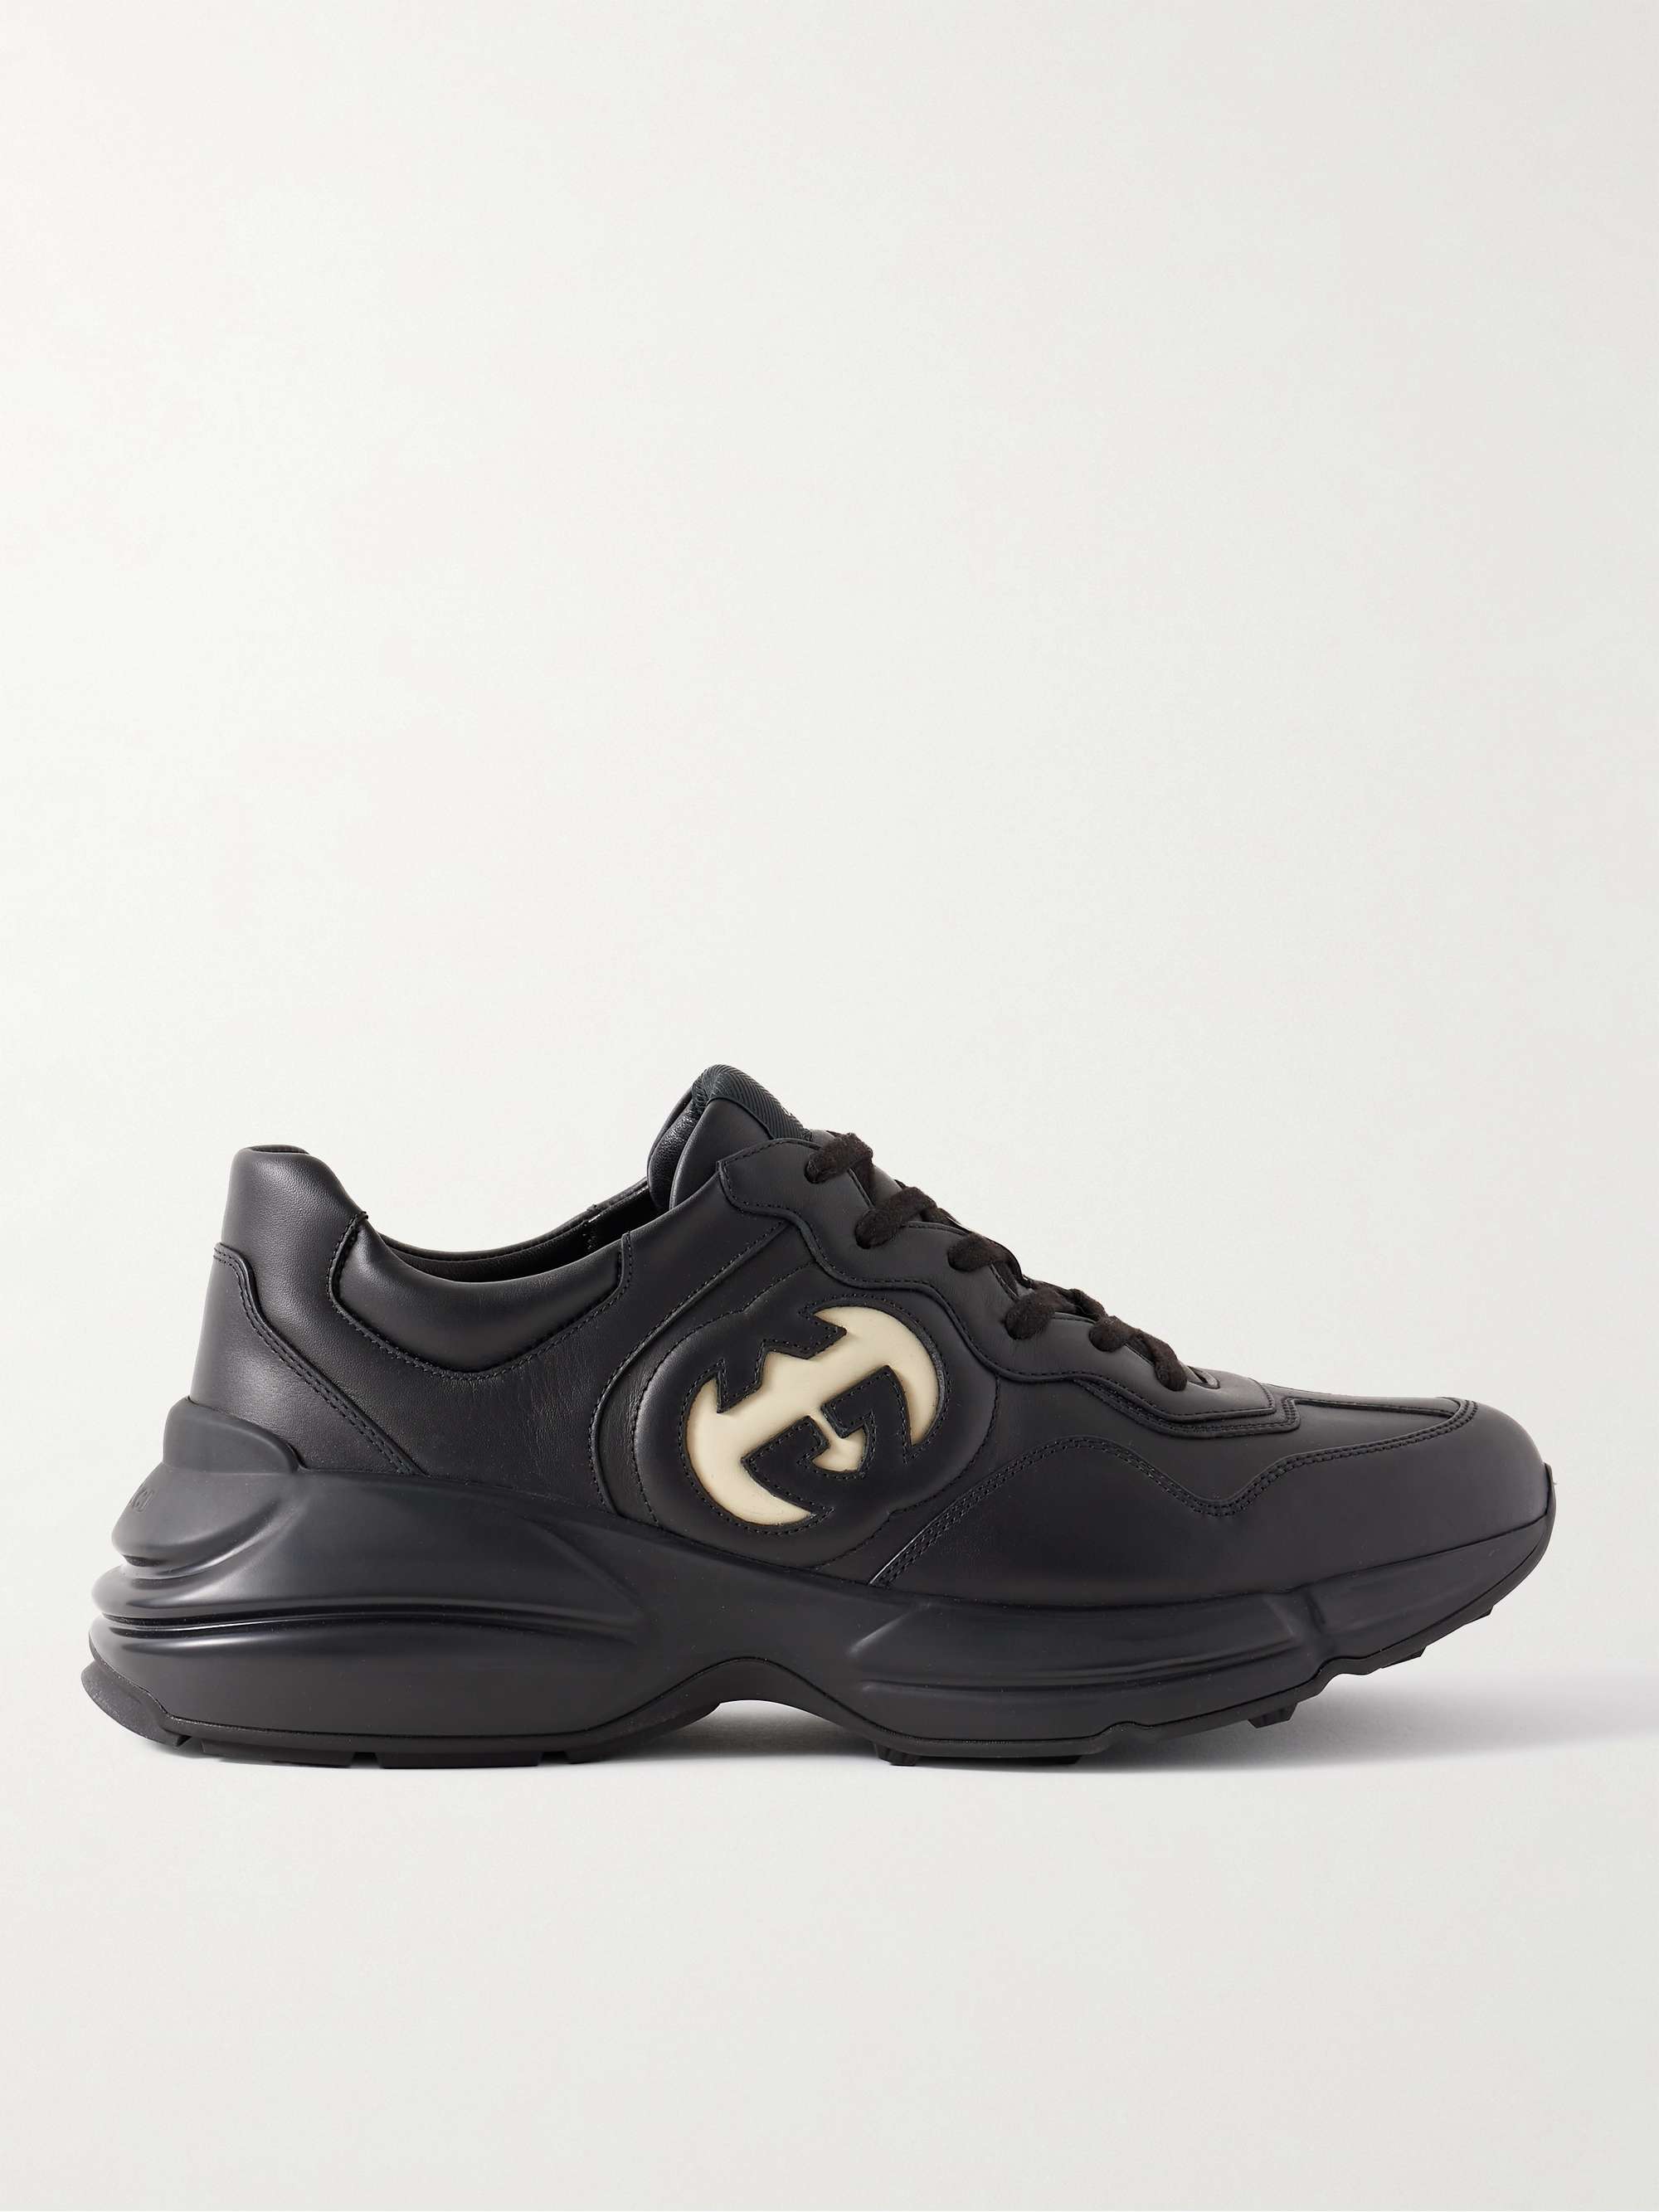 GUCCI Rhyton Leather Sneakers for Men | MR PORTER